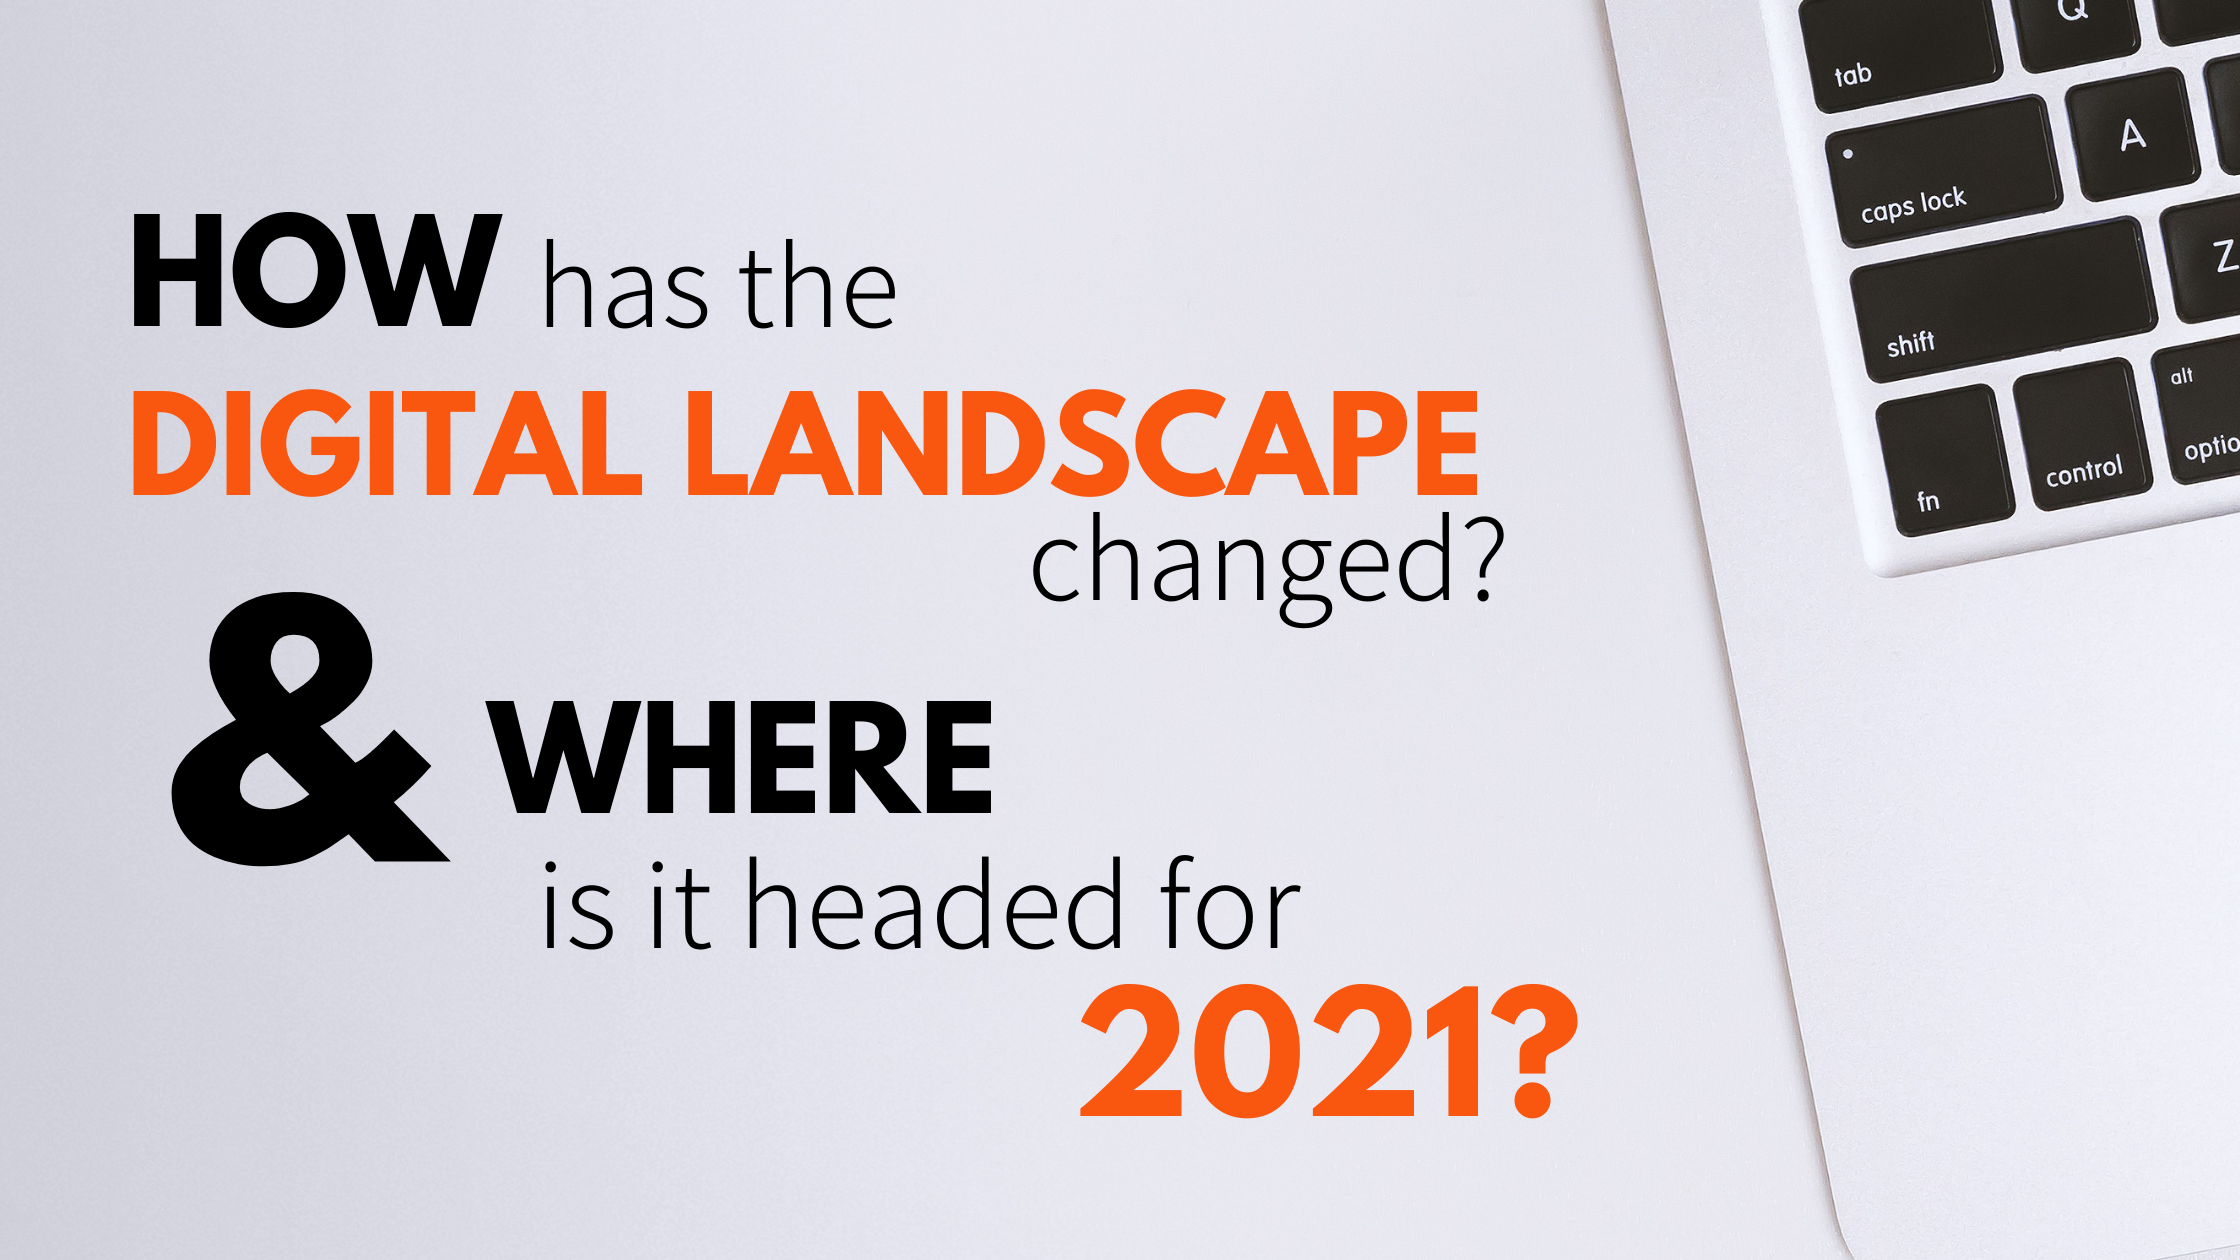 How has the digital landscape changed and where is it headed for 2021